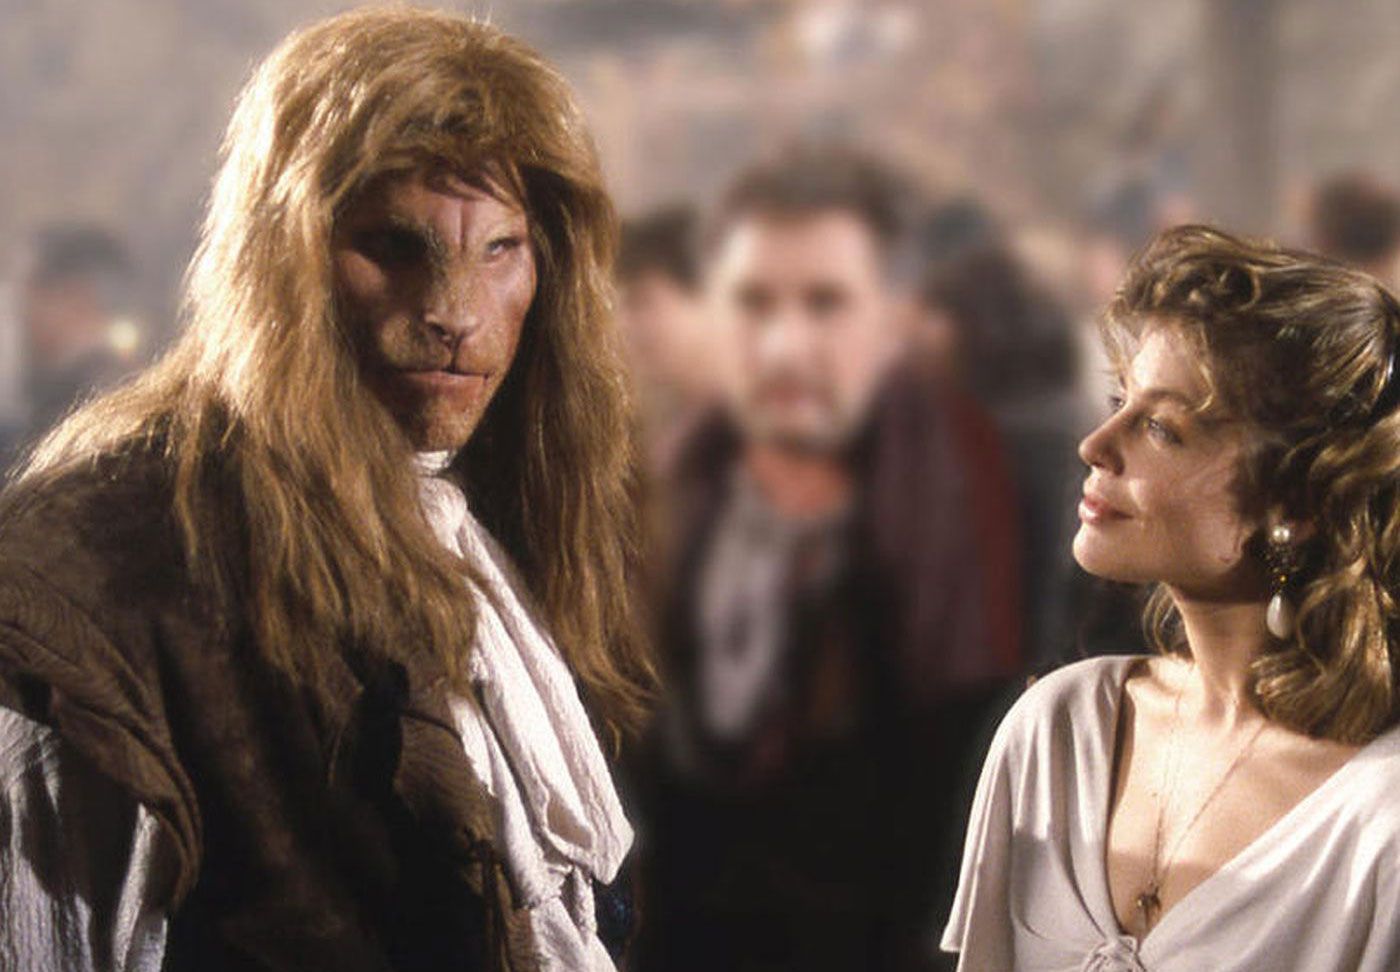 Ron Perlman and Linda Hamilton in Beauty and the Beast